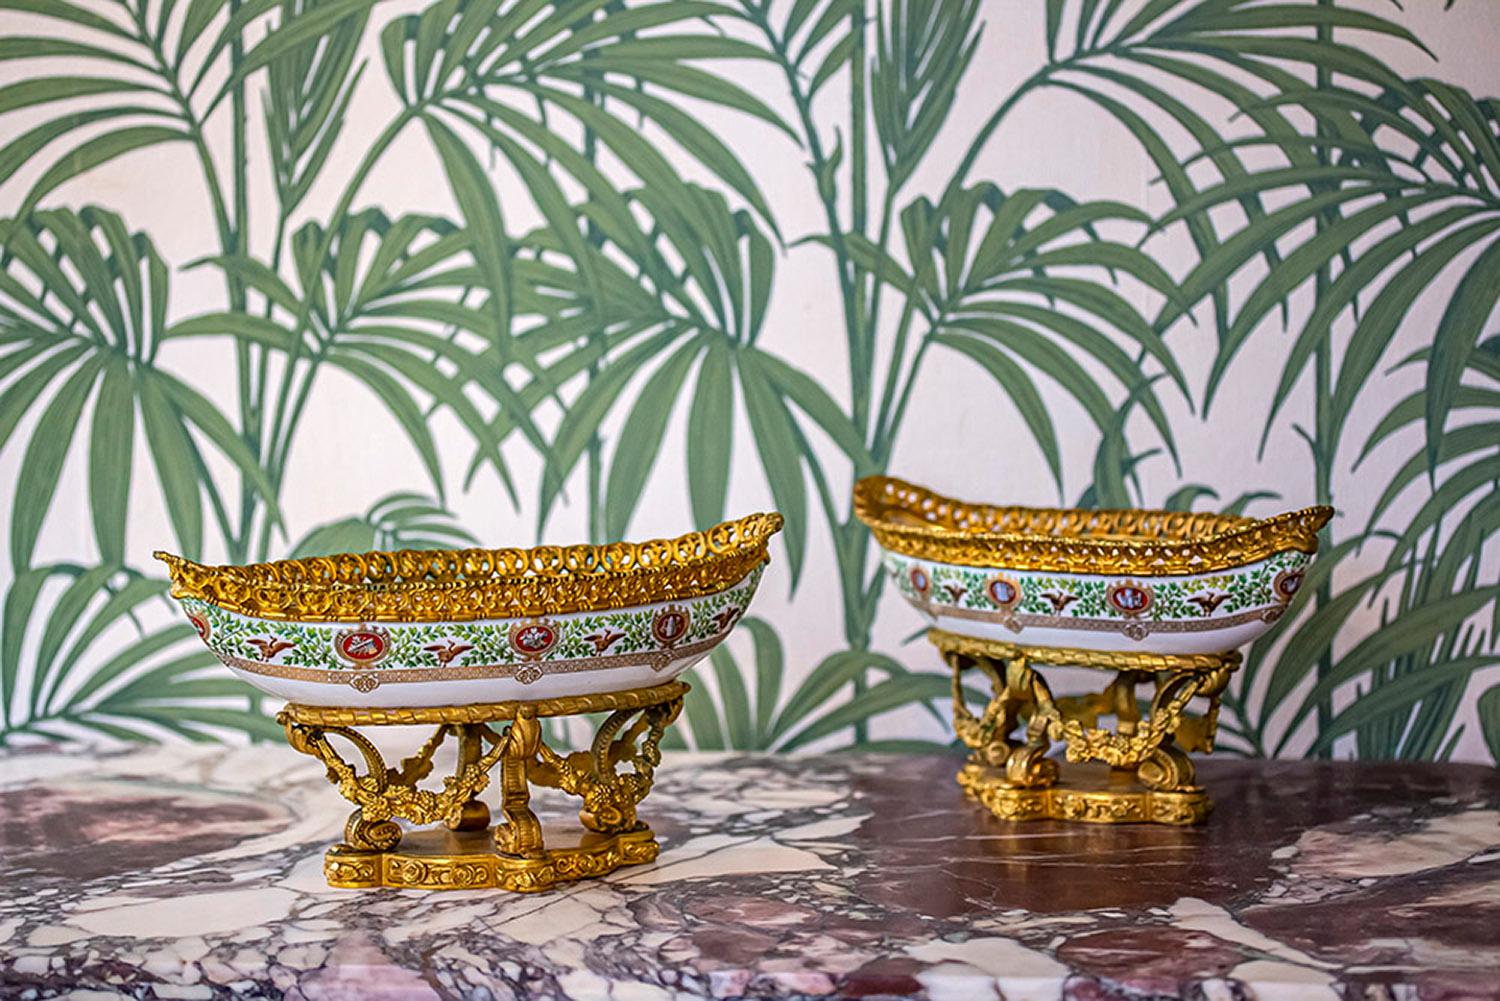 Ormolu Mounted

From our Ceramics collection, we are delighted to offer a pair of French Sevres boat-shaped porcelain dishes with original ormolu mounts. The serving dishes beautifully decorated with a frieze of vibrant green undulating foliate